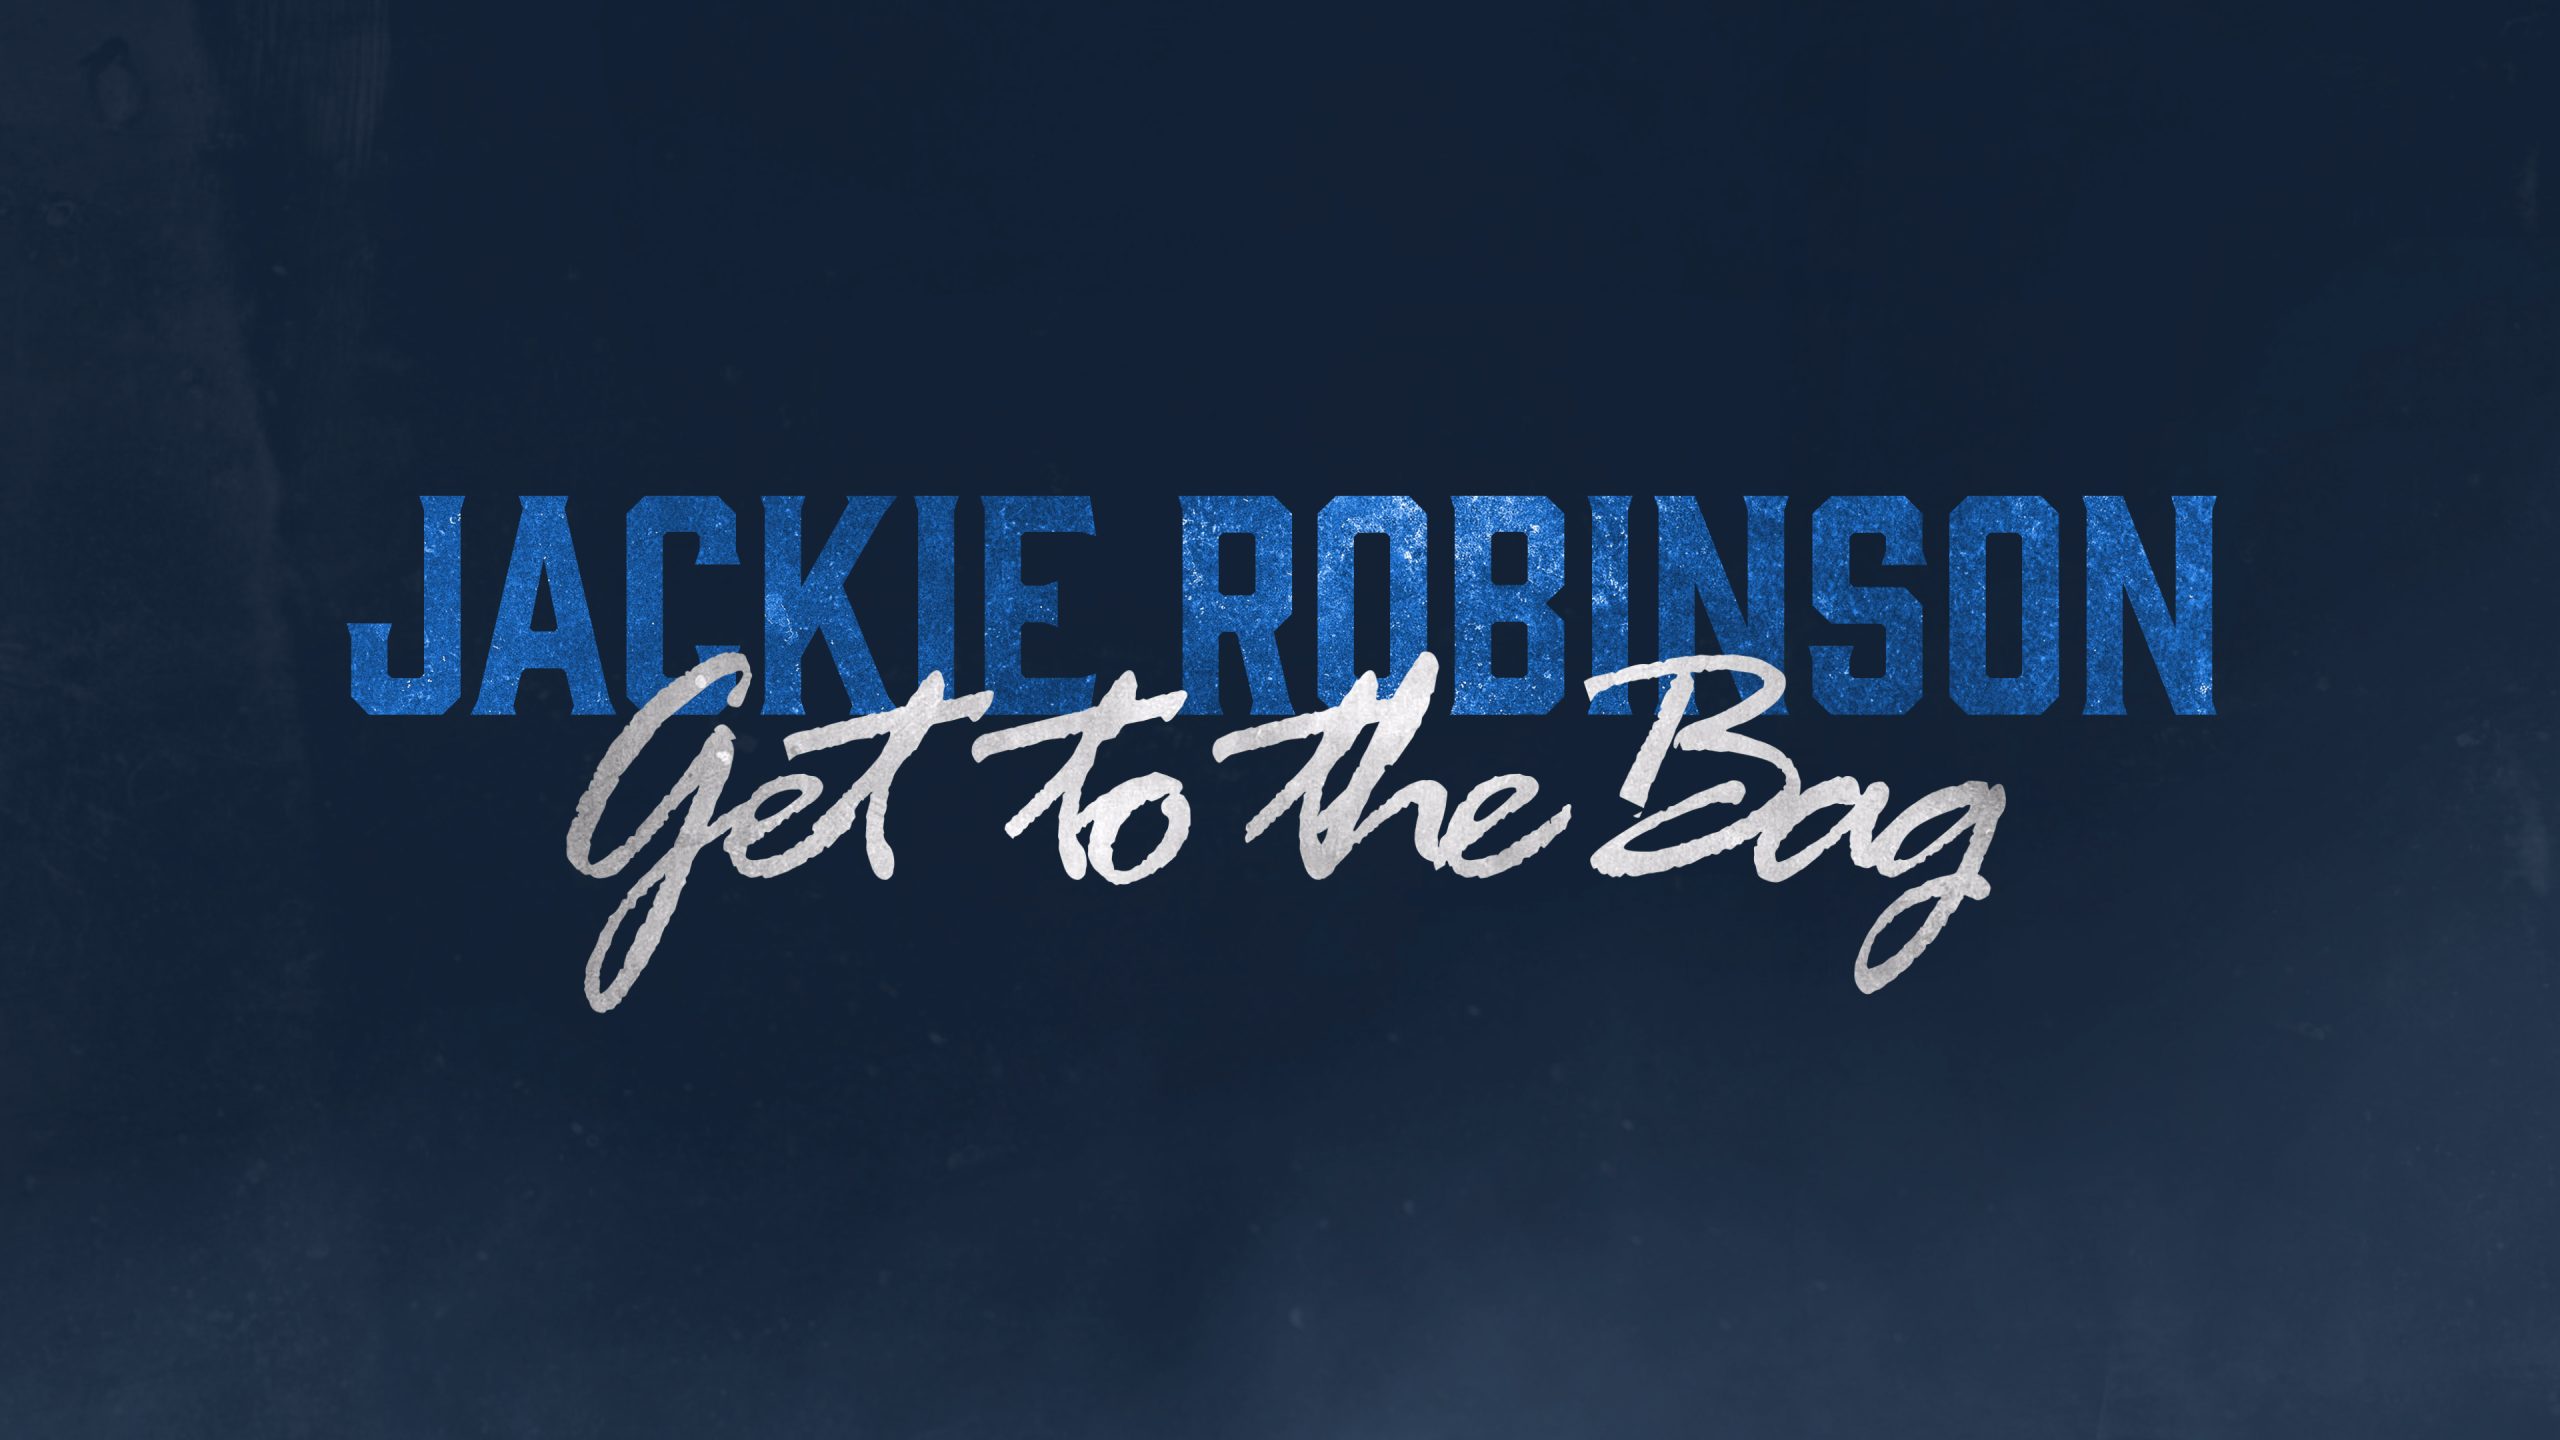 Fox Sports Presents 'Jackie Robinson: Get to the Bag' a Fresh Perspective  Documentary - The Hype Magazine